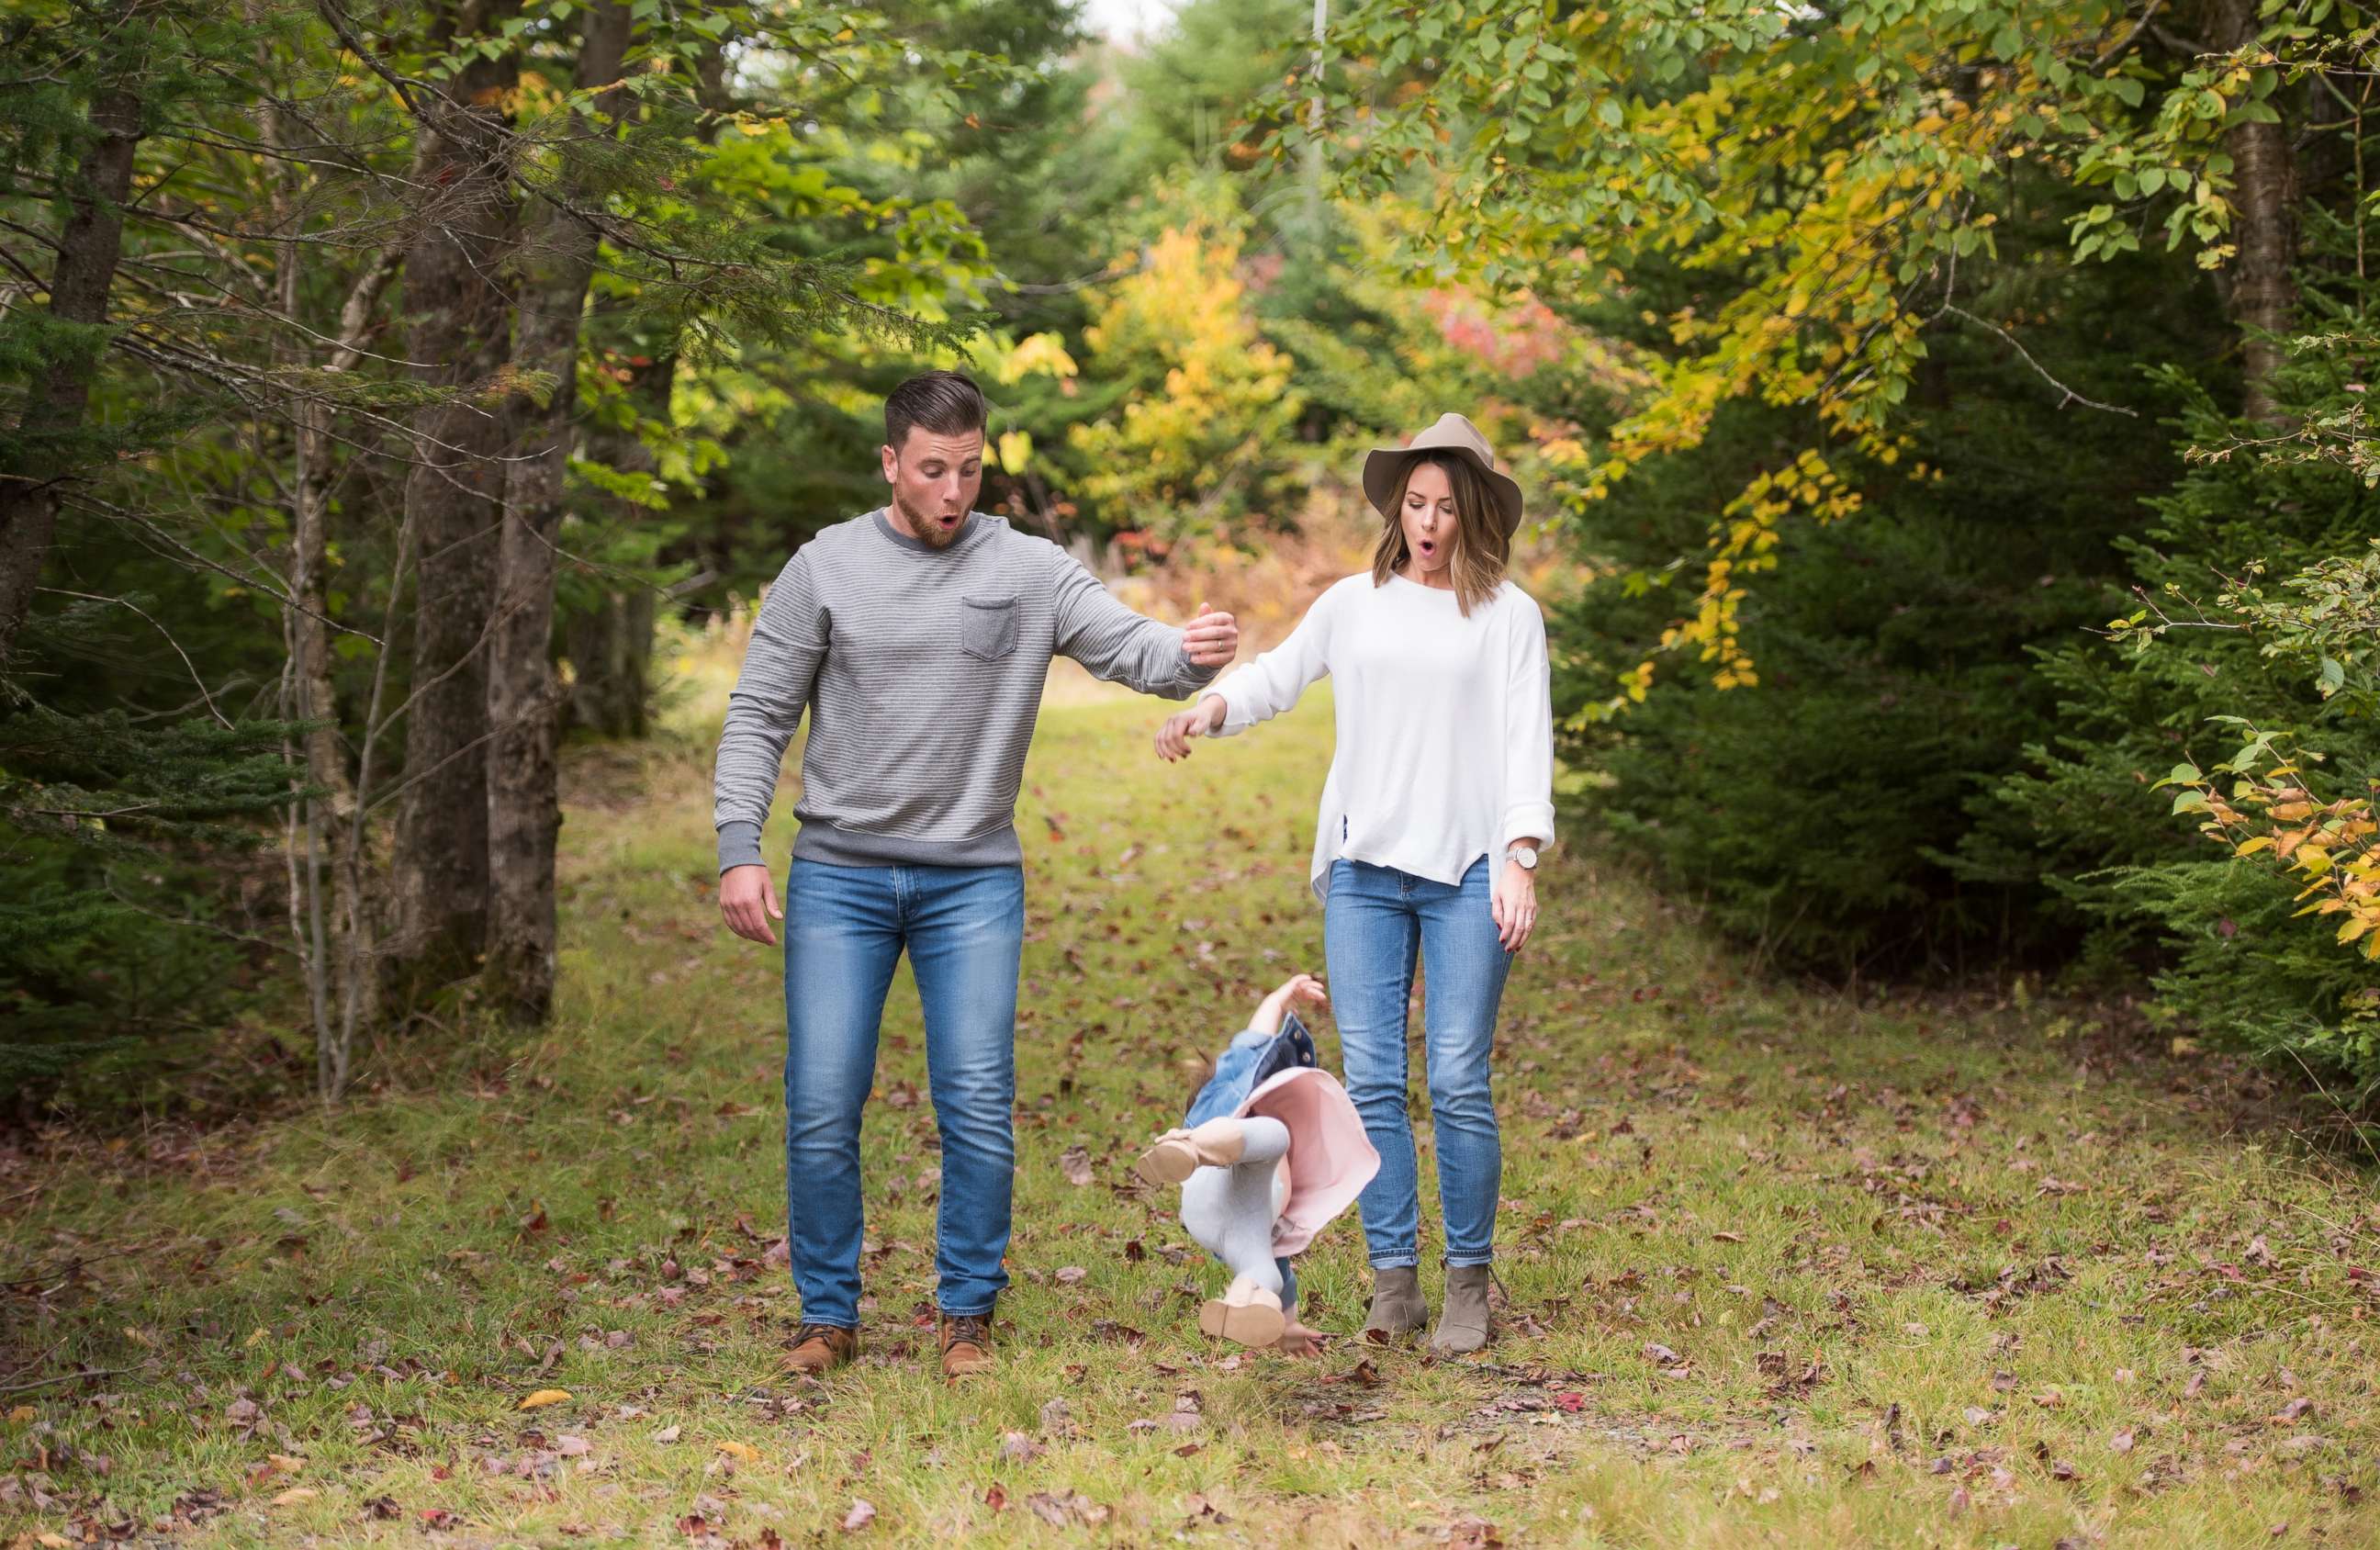 PHOTO: Patrick LeBlanc, Brianna LeBlanc and Reid LeBlanc, 2, of Halifax, Nova Scotia, got lots of laughs on the Internet after this photo was shared of the toddler falling in the midst of a family photo shoot.